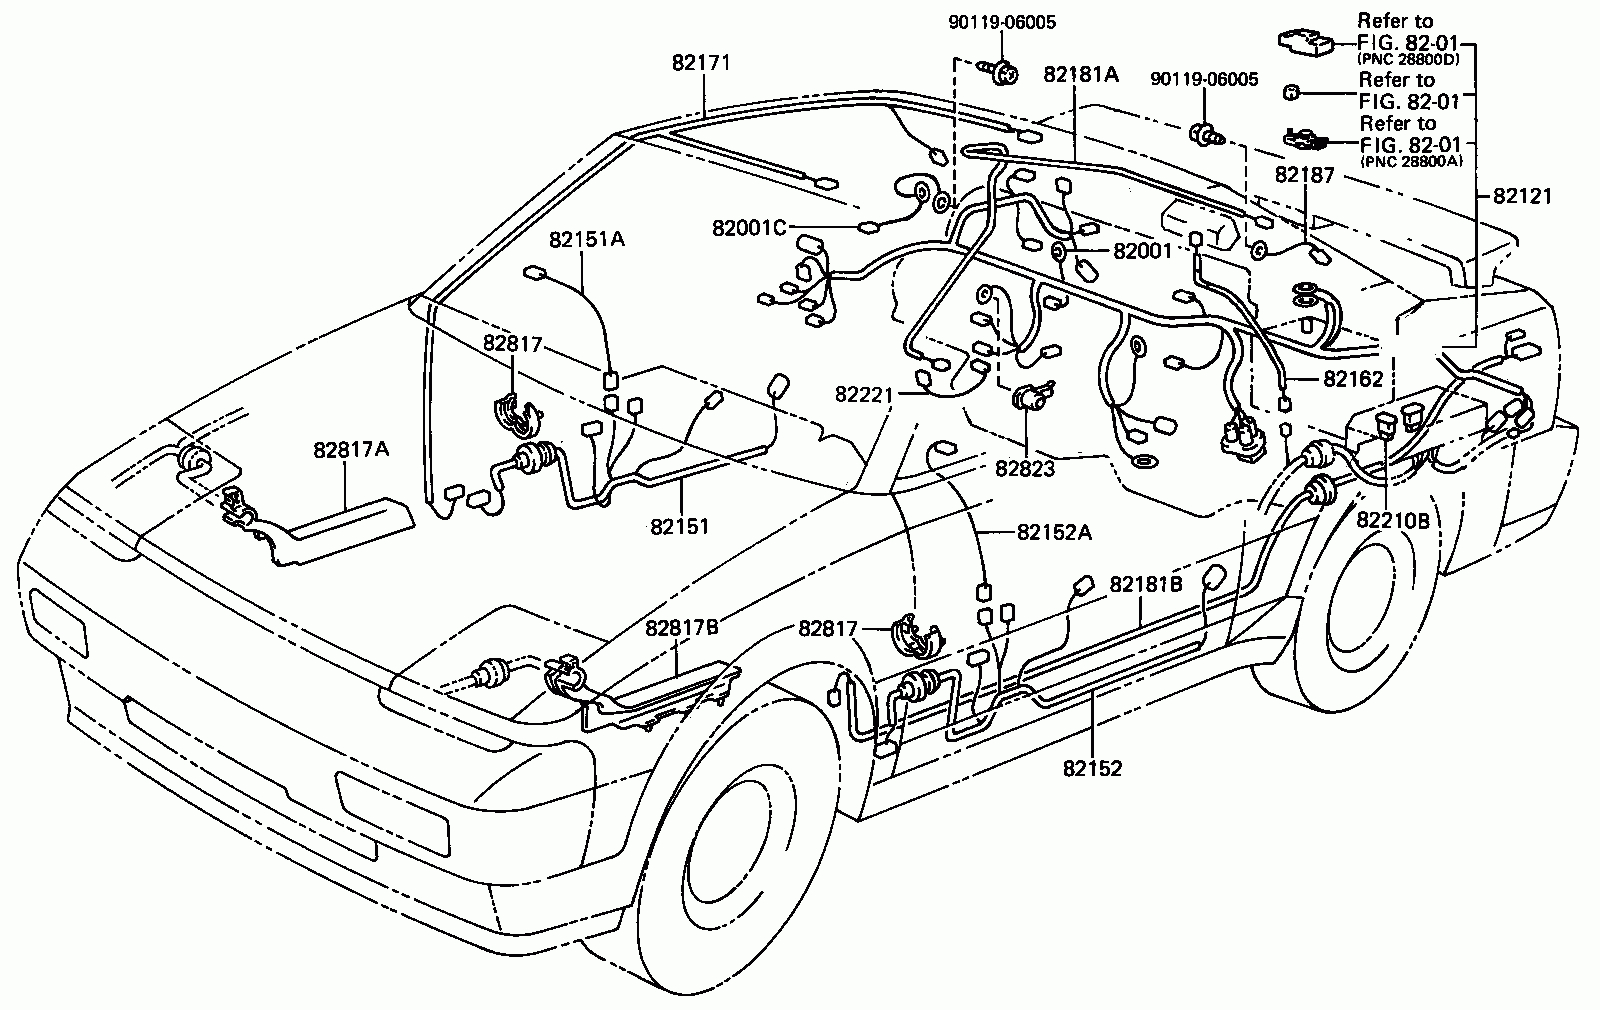 Diagram Chevy Western Plow Wiring Diagram 2 Realy Full Version Hd Quality 2 Realy Classdiagramexamples Veneziaartmagazine It